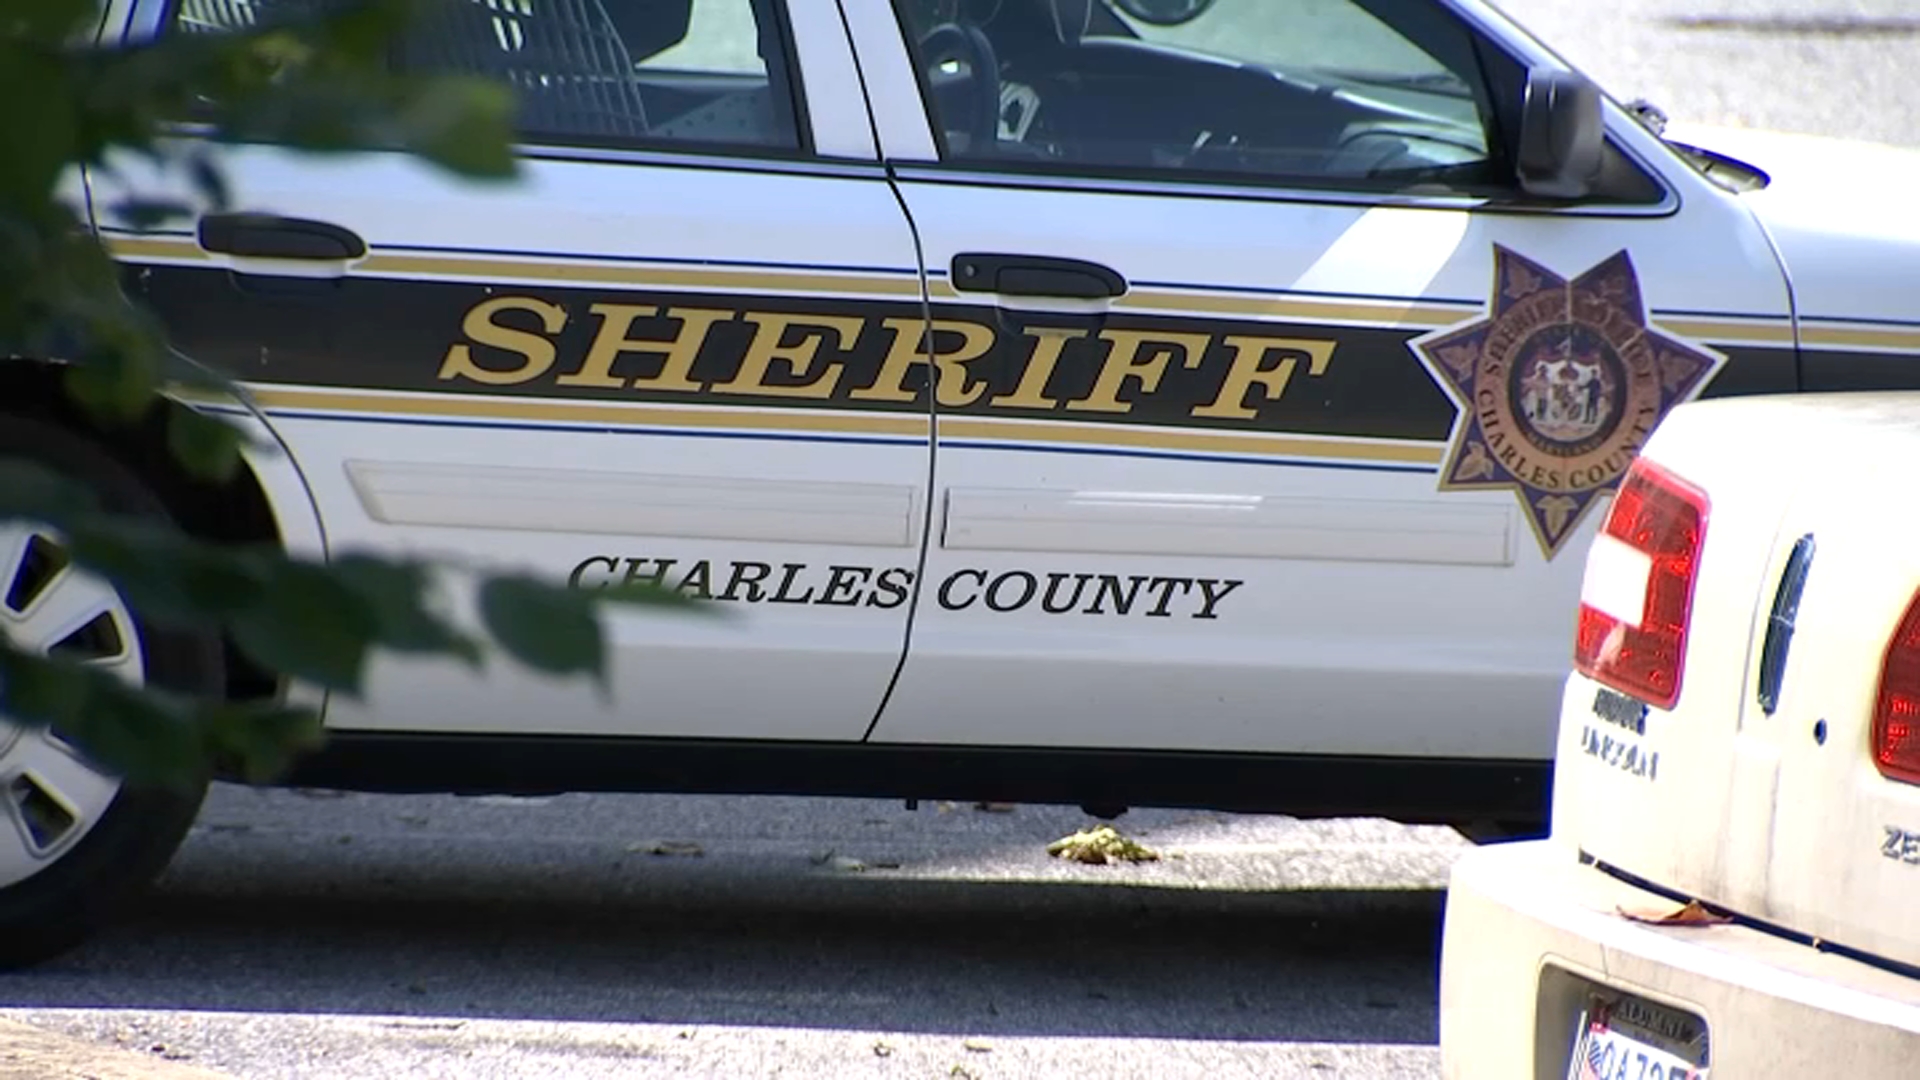 12-Year-Old Boy Killed While Playing With Gun in Charles County